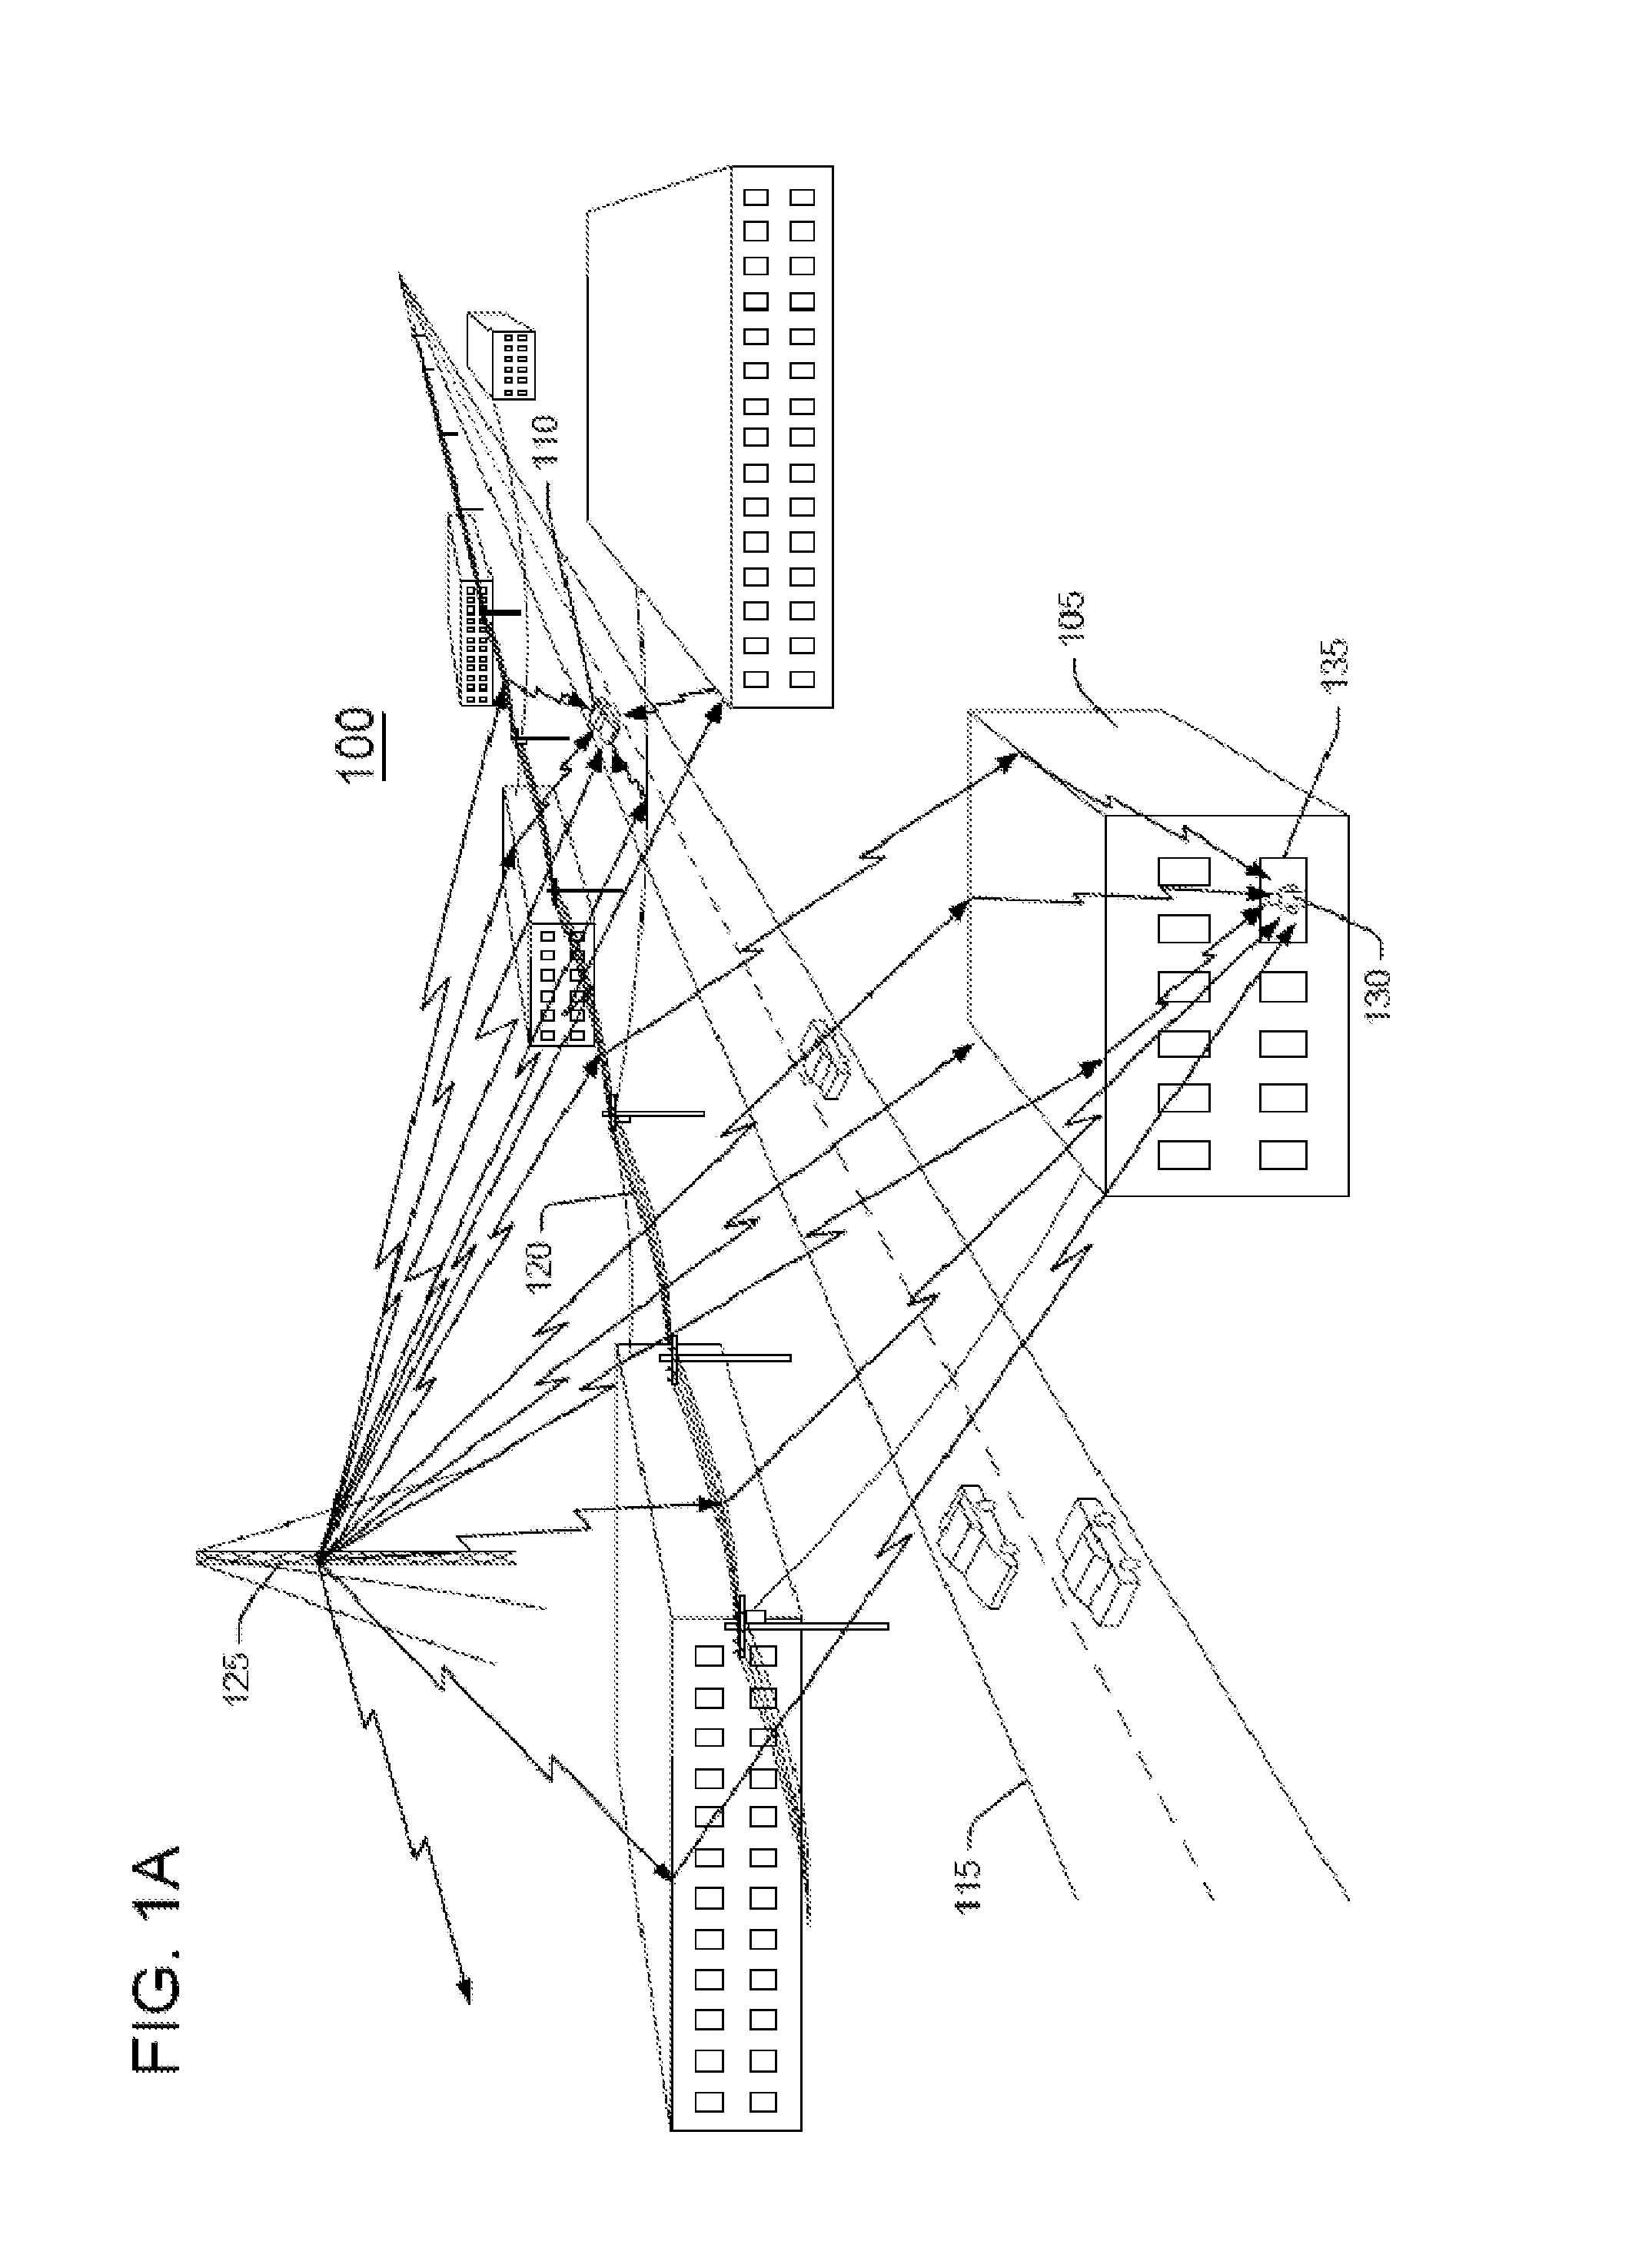 Method of near-field electromagnetic ranging and location